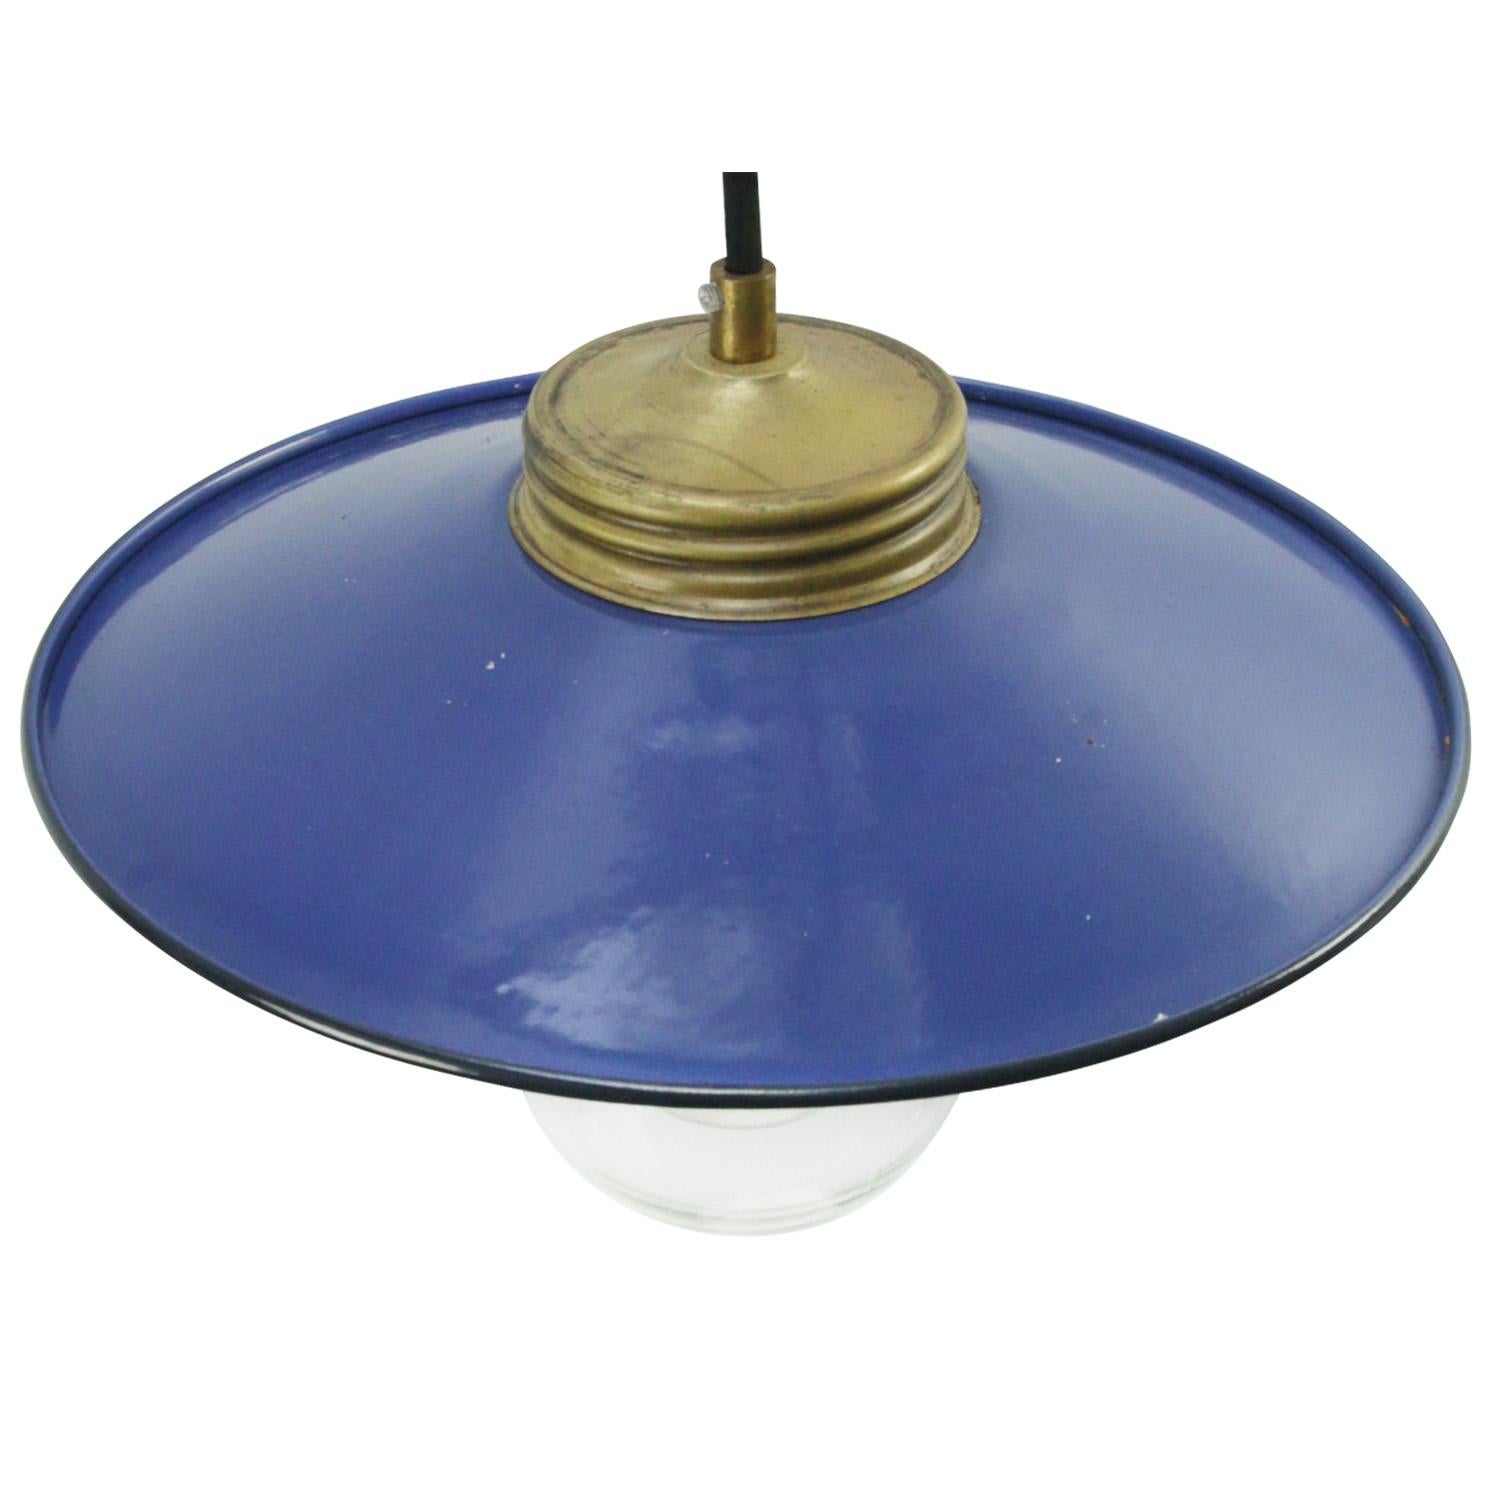 Blue enamel Industrial hanging lamp.
Clear glass with brass top.

Weight: 1.10 kg / 2.4 lb

Priced per individual item. All lamps have been made suitable by international standards for incandescent light bulbs, energy-efficient and LED bulbs.